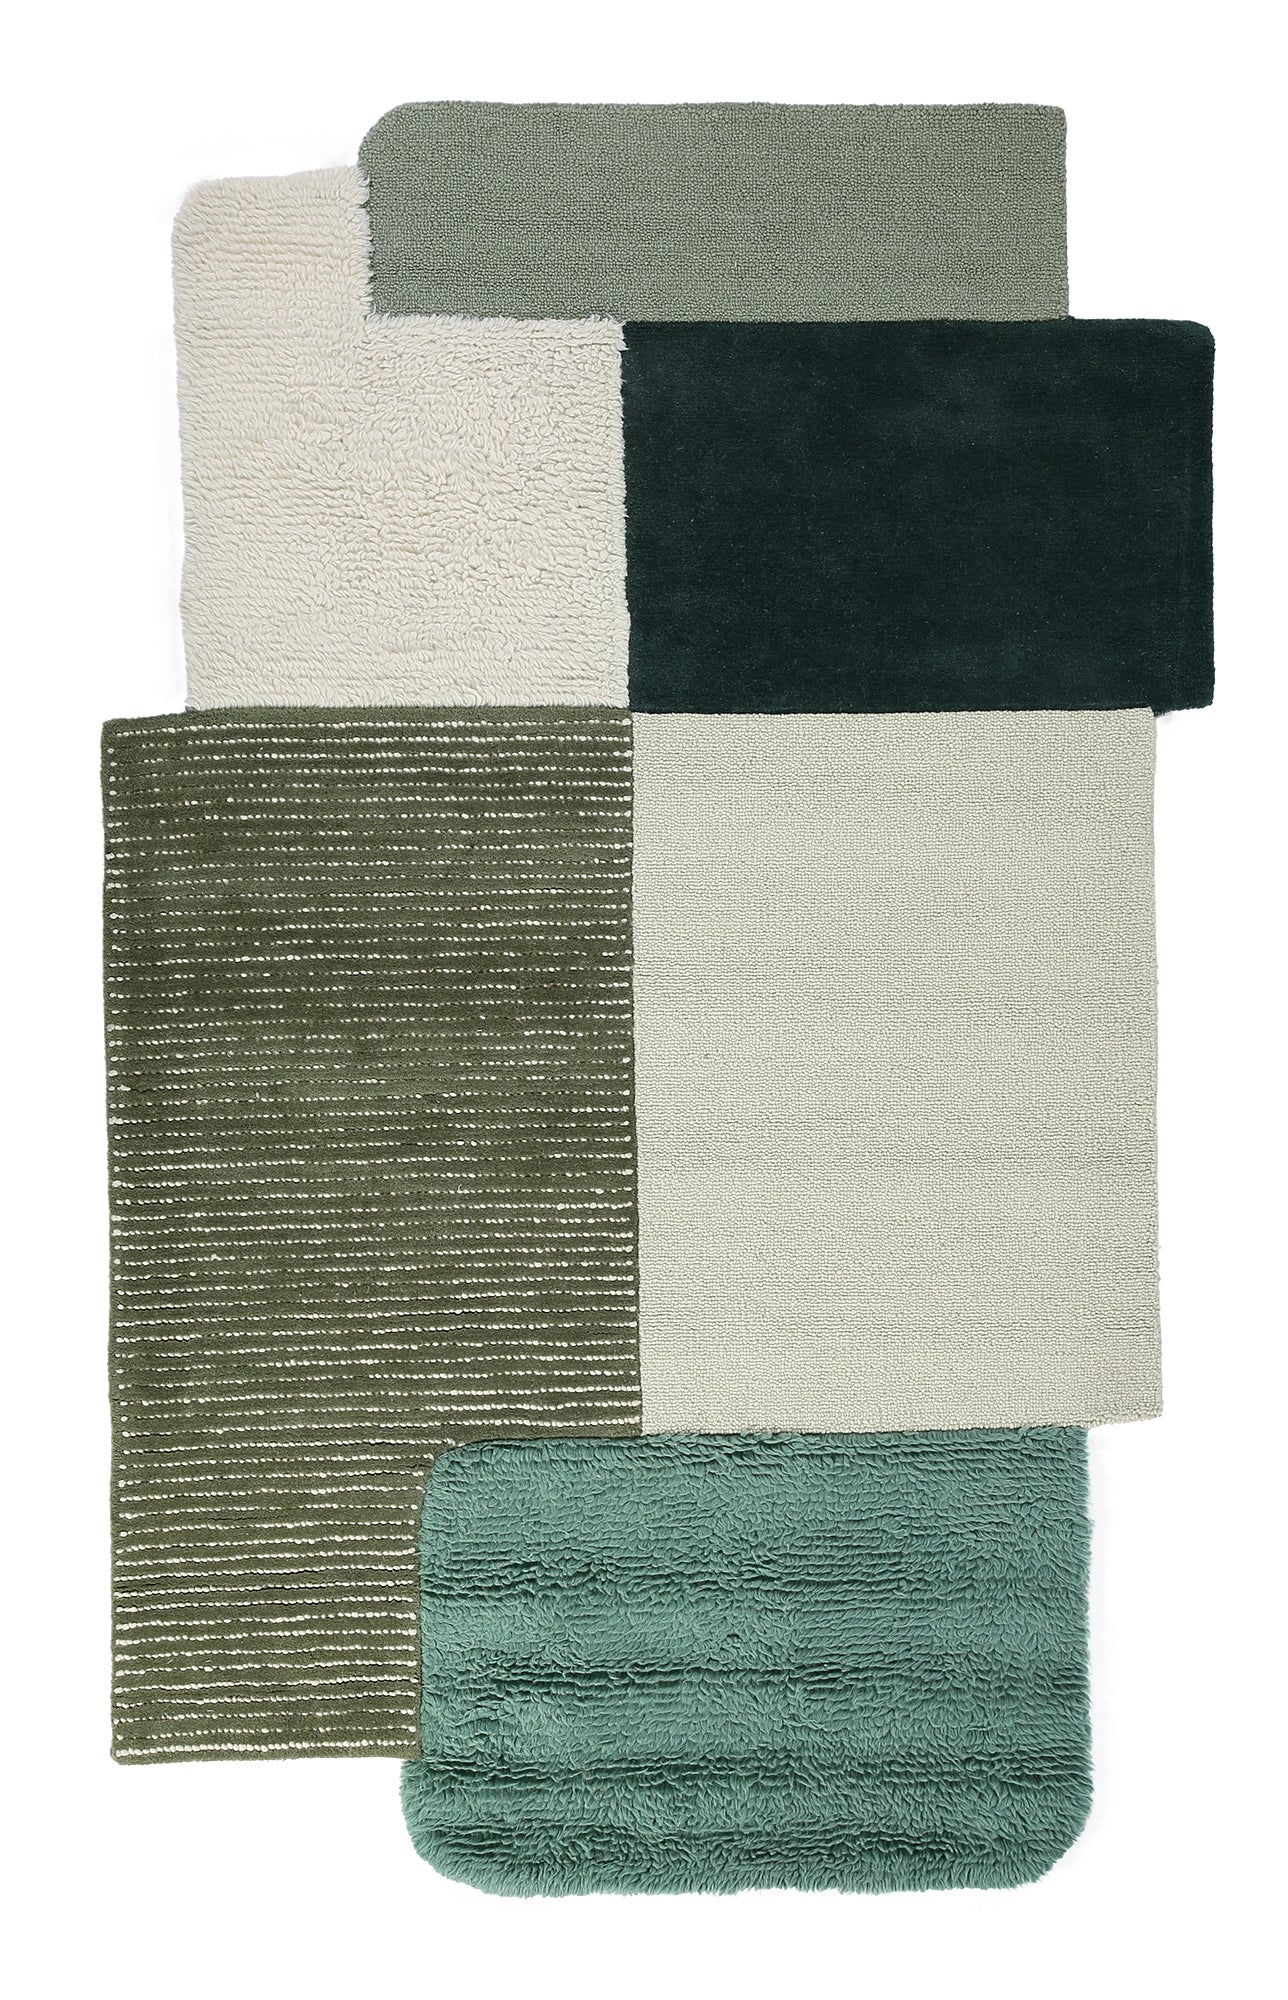 Multicolor Hand Tufted Wool Rug - 5'x8'